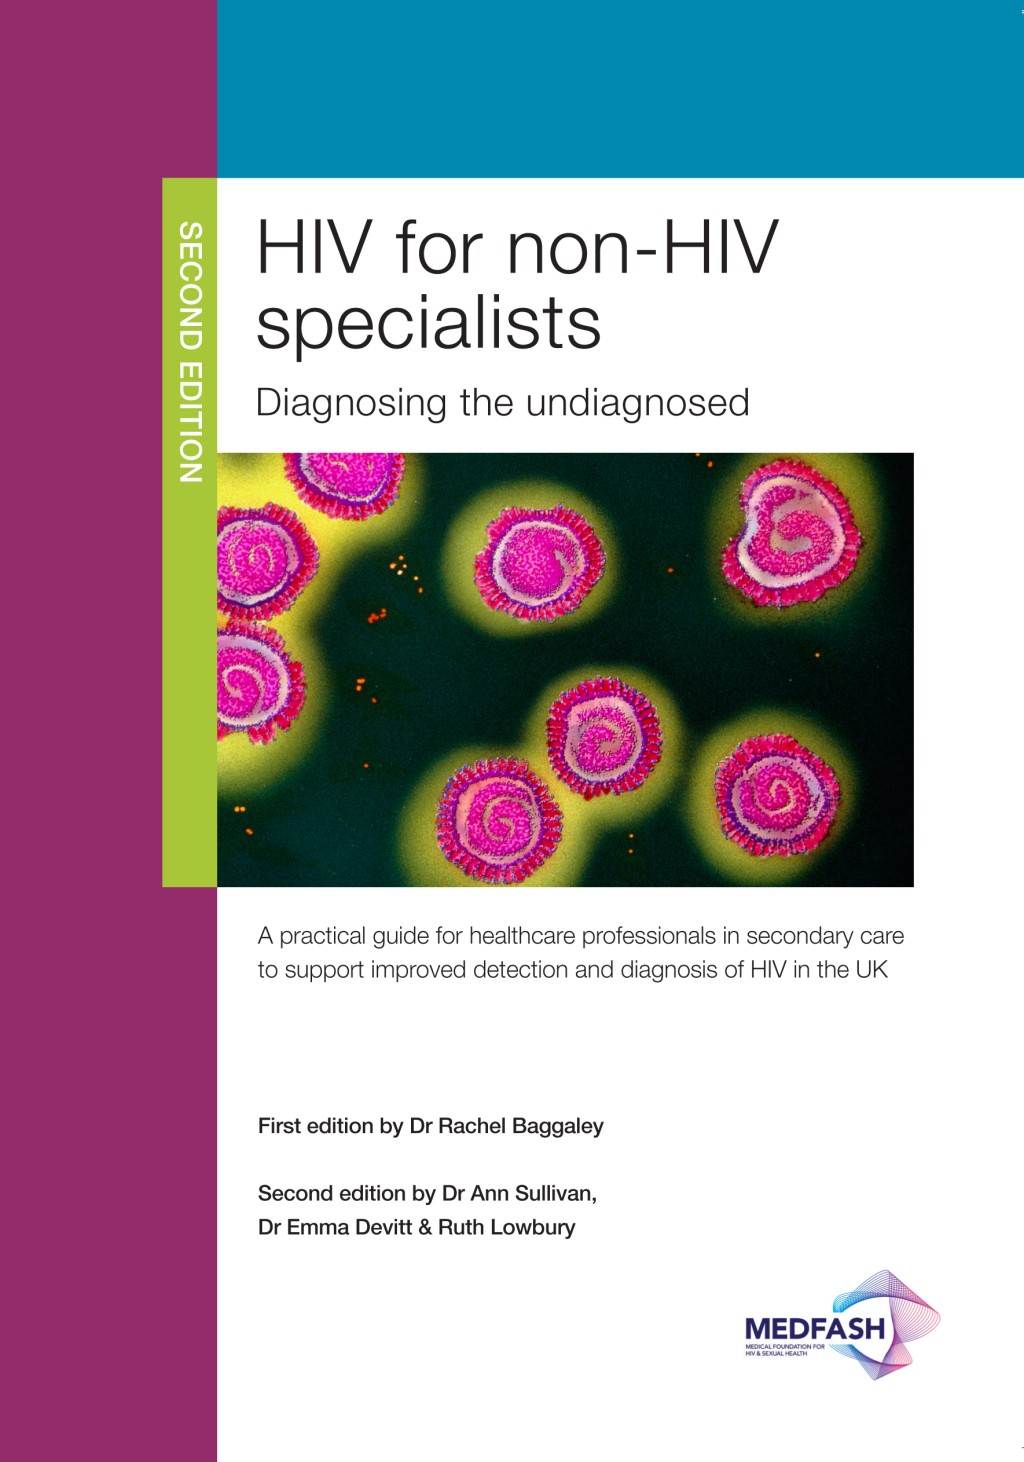 HIV-for-non-HIV-specialists-booklet